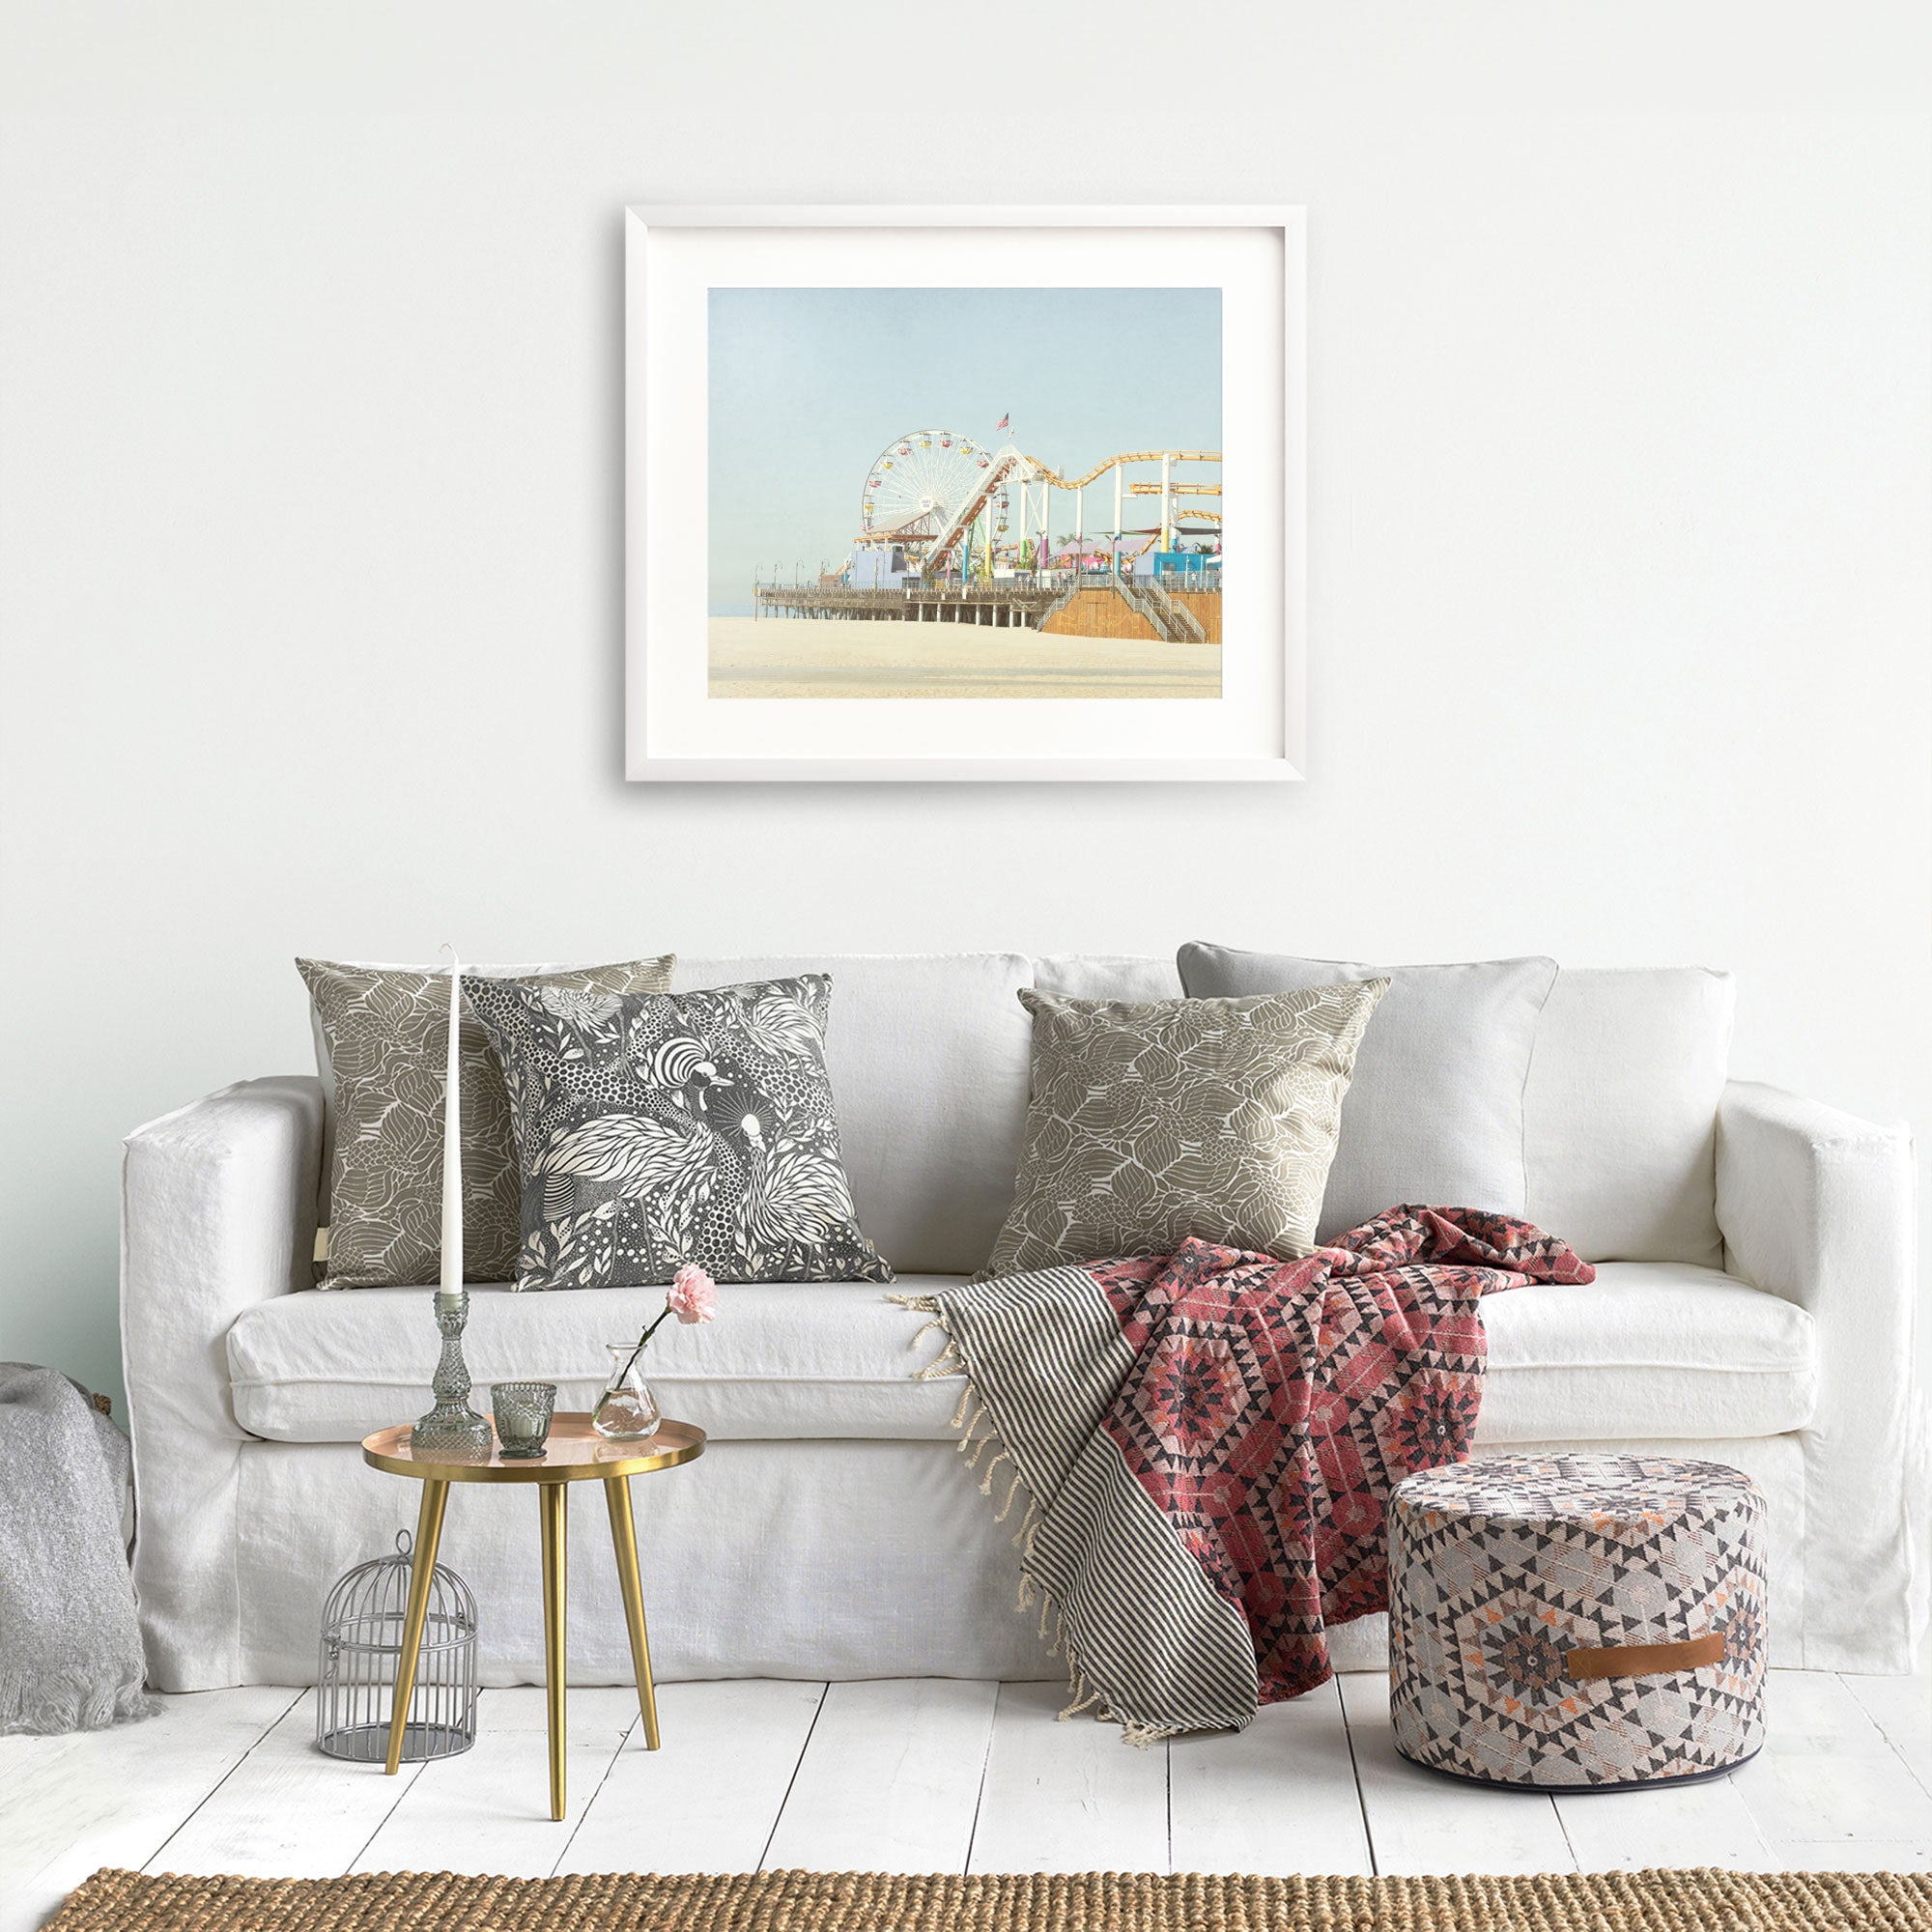 A cozy living room with a white sofa adorned with patterned pillows, a red throw blanket, a small round table, and a birdcage decor item, featuring a framed painting of the Offley Green California Print, &#39;Santa Monica Pier&#39;